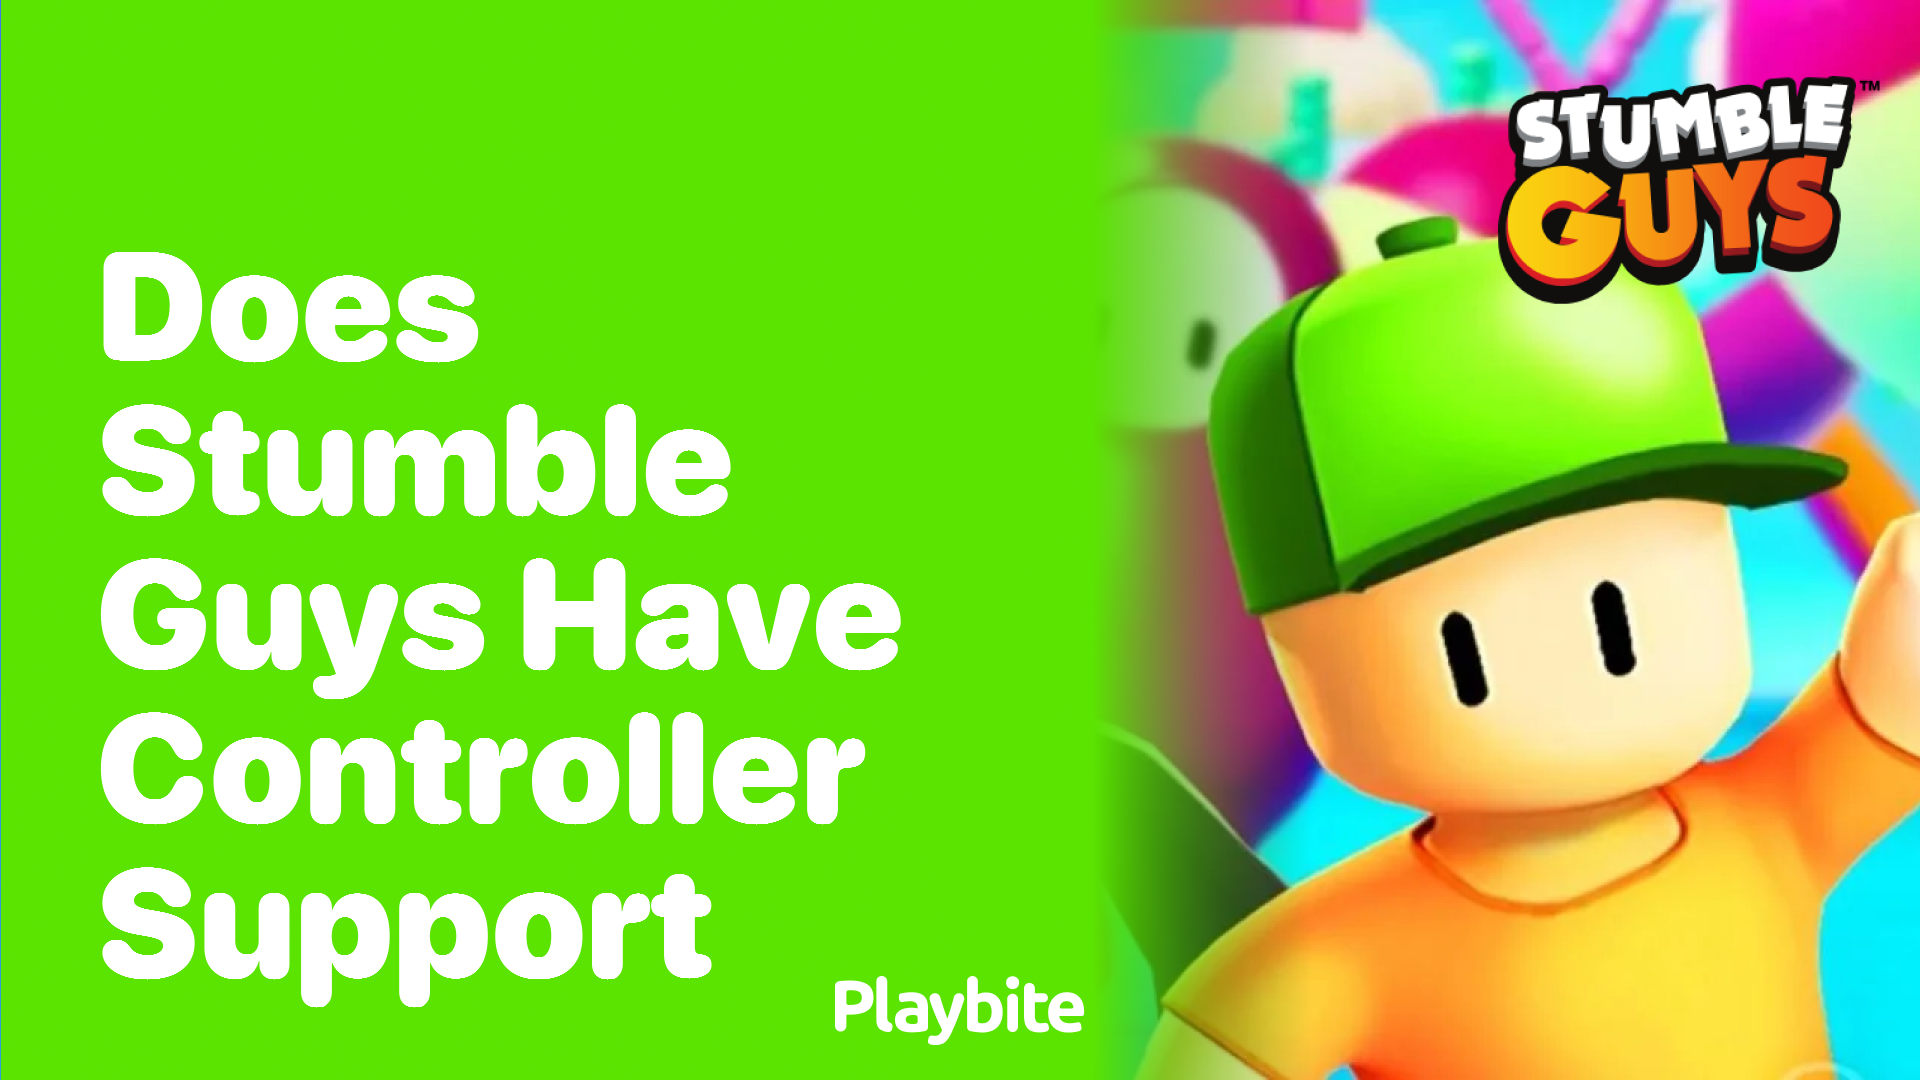 Does Stumble Guys Have Controller Support?